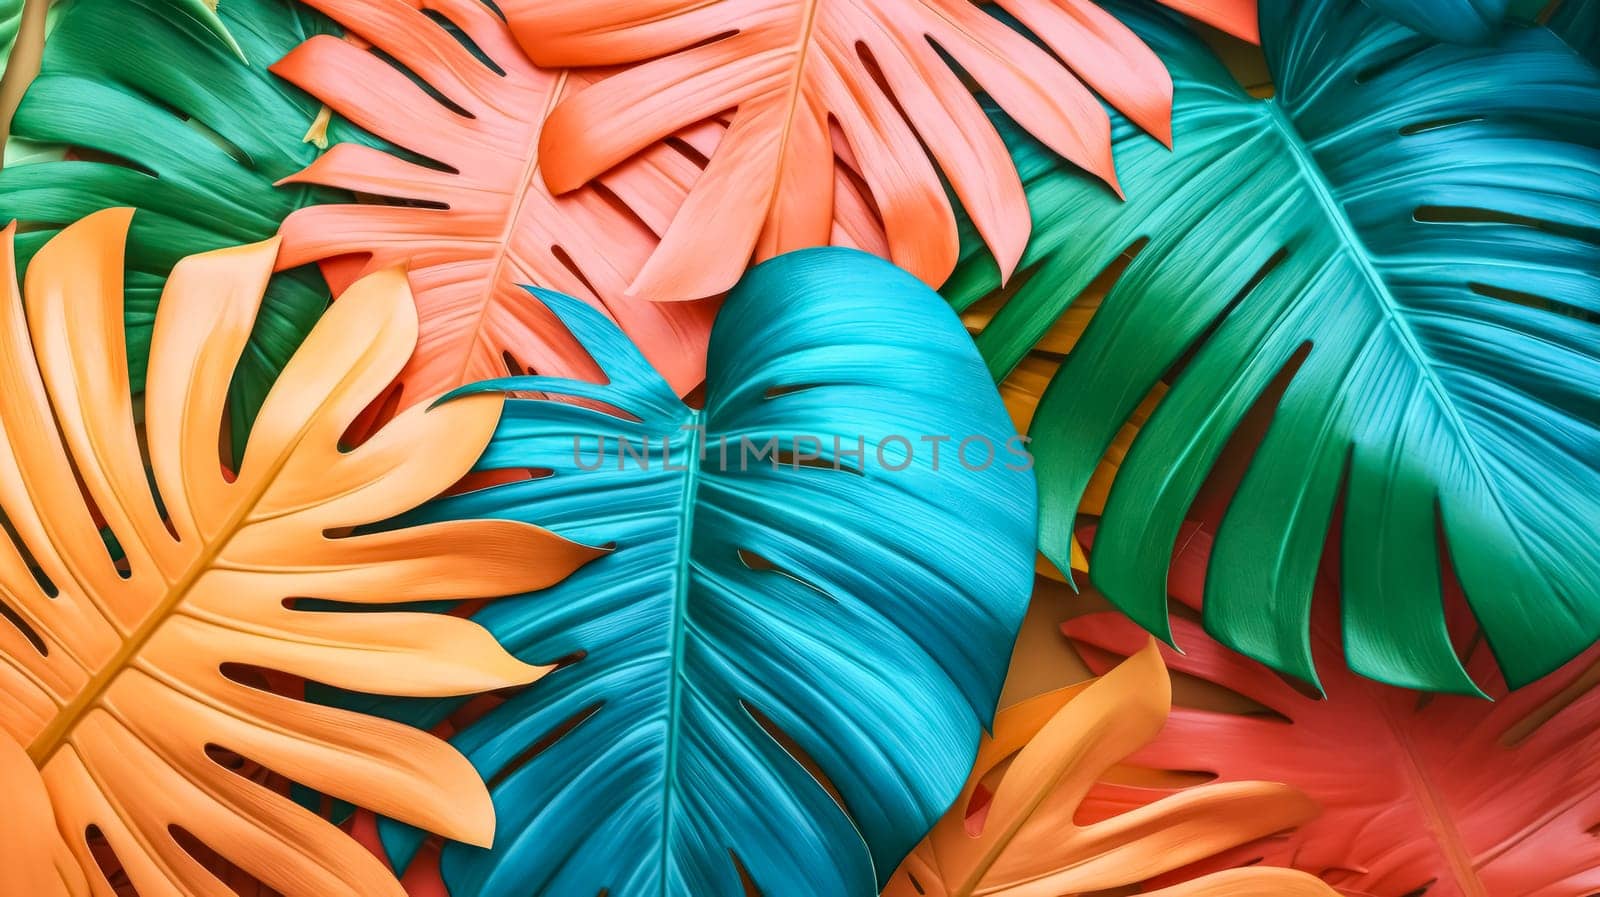 Vibrant and creative fluorescent color layout crafted from tropical leaves by Alla_Morozova93